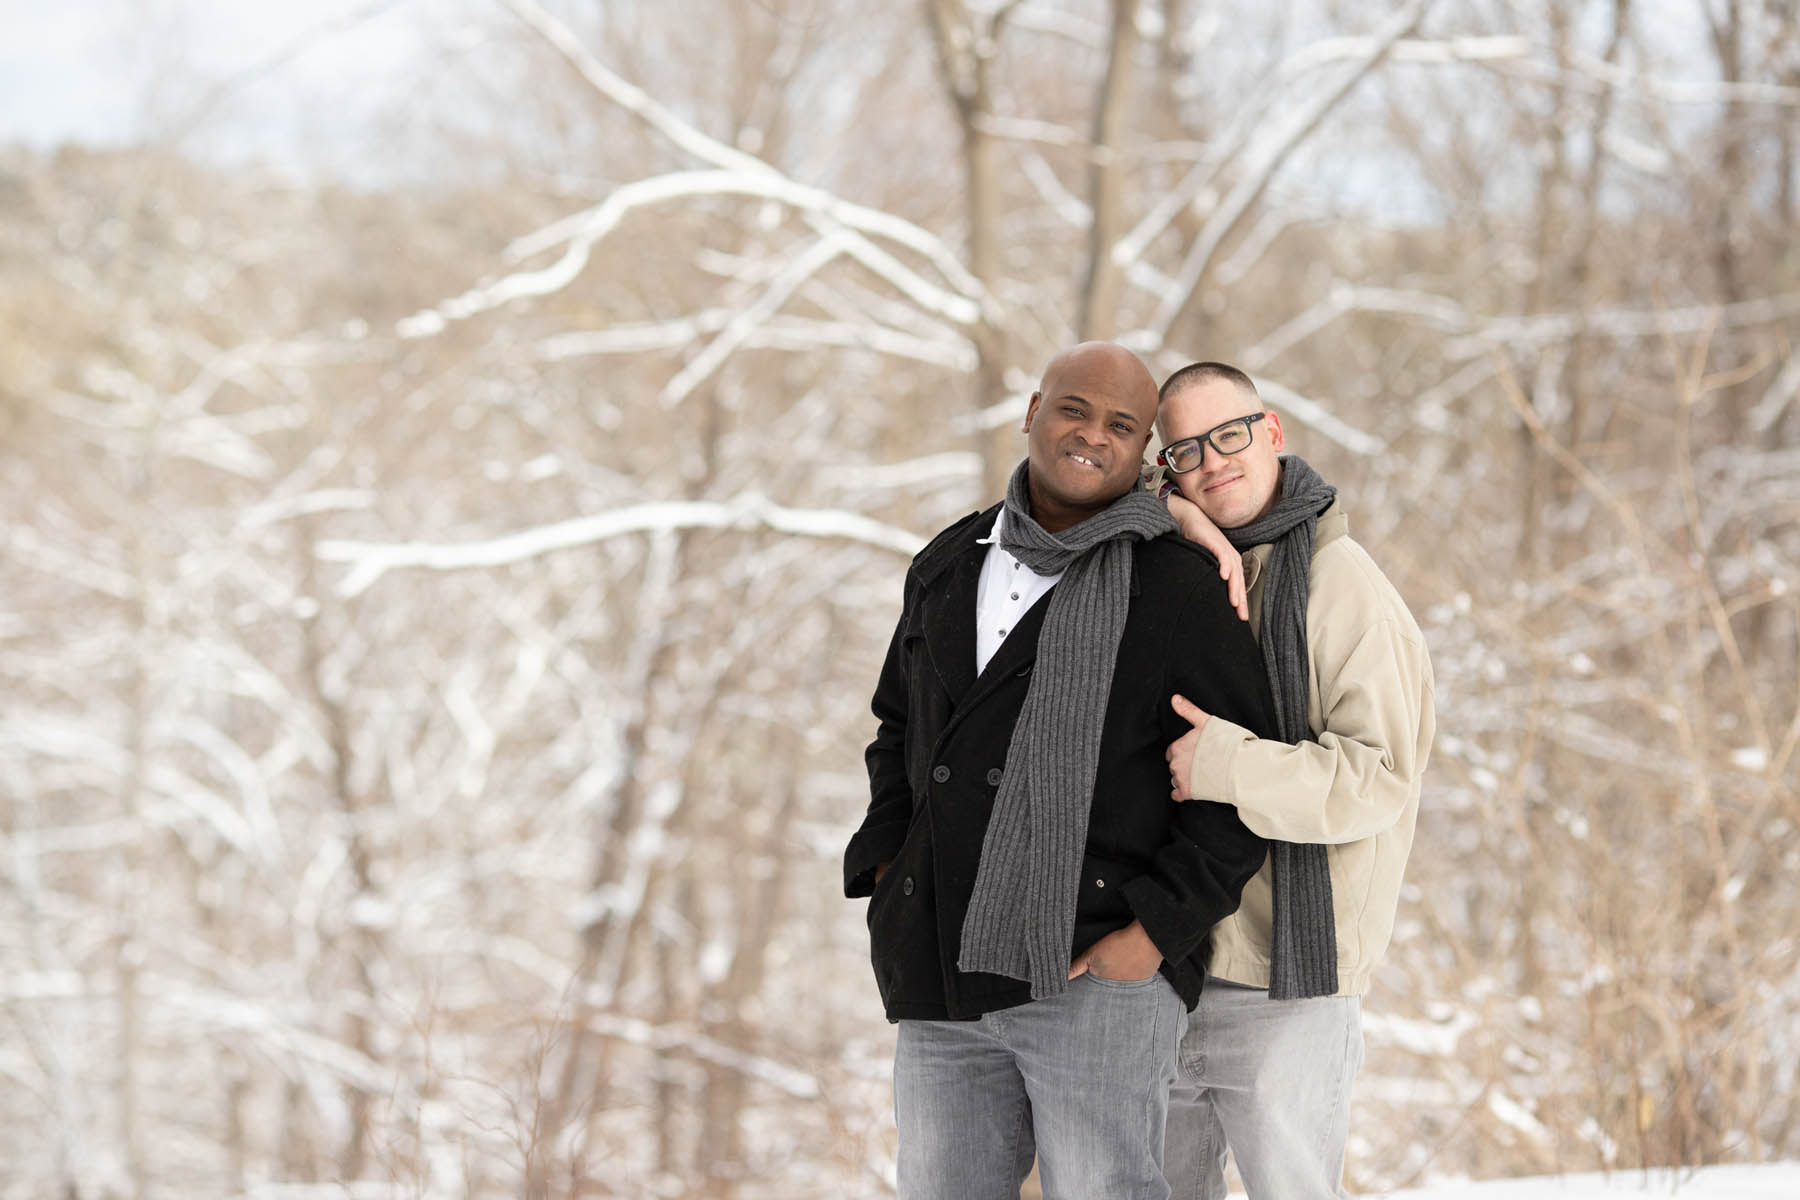 Two people stand in front of snowy trees, smiling at the camera. The person on the right holds the arm of the person on the left.